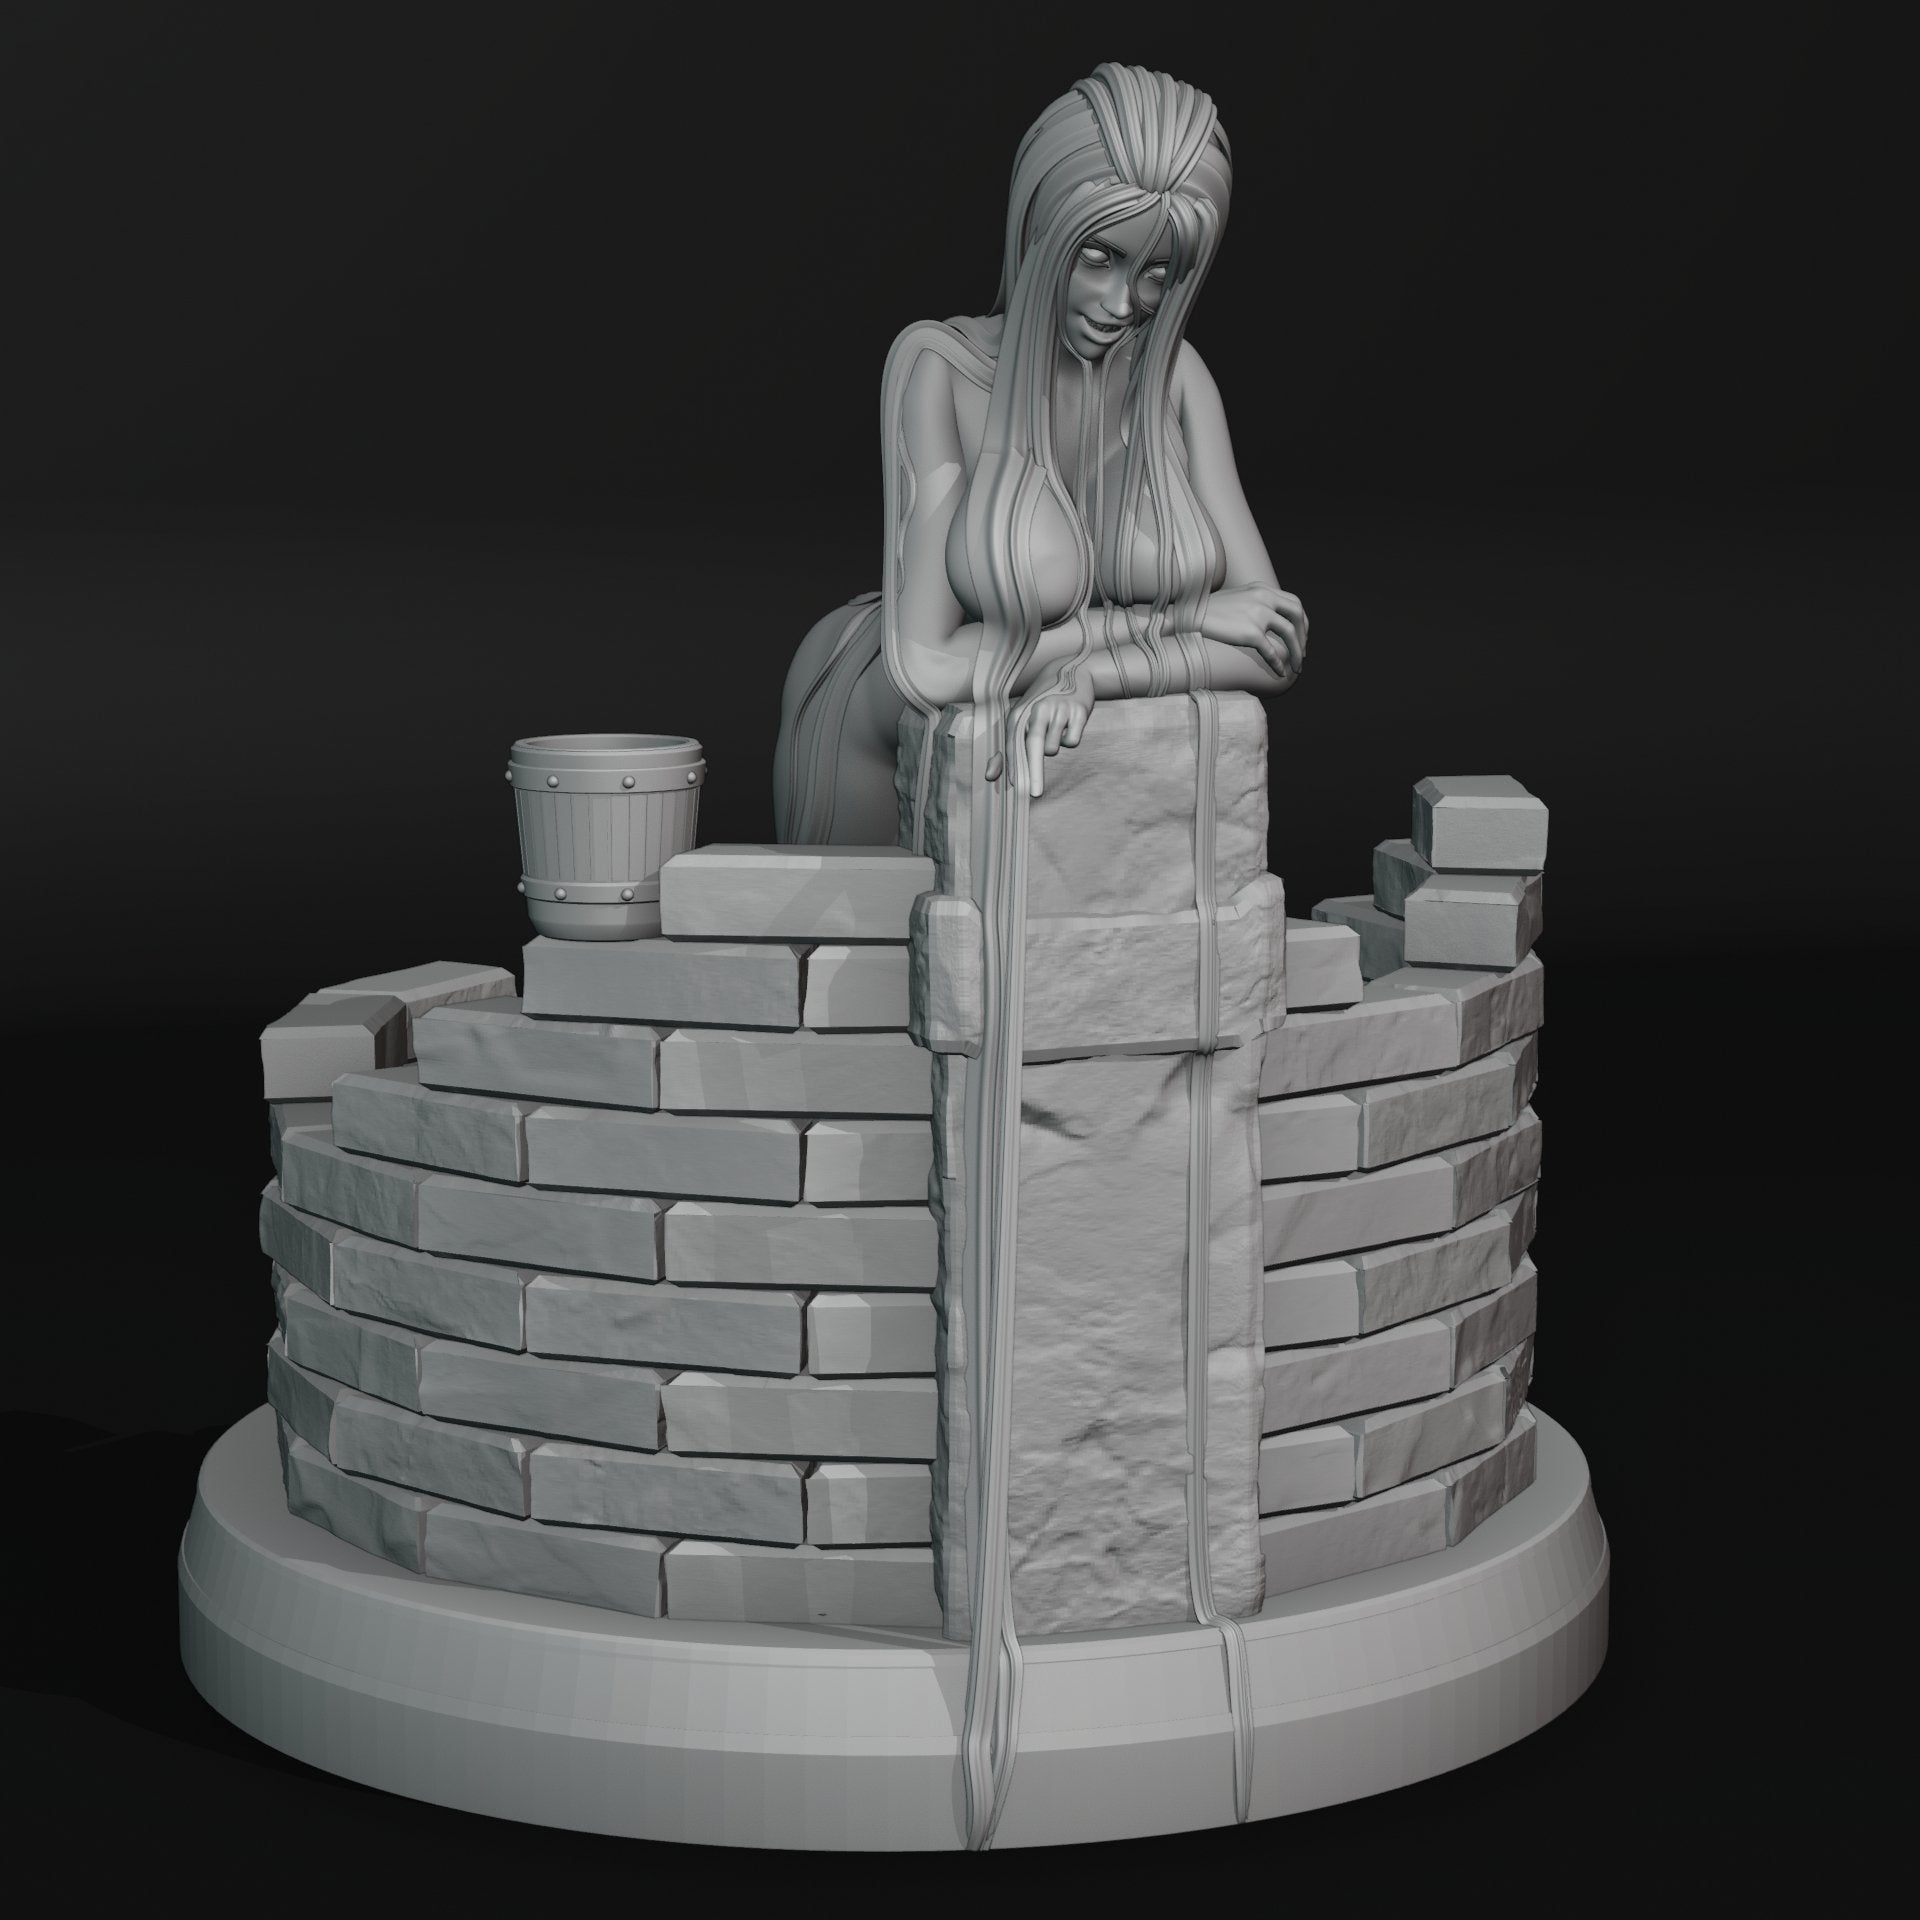 Maiden of the Well 3d Printed miniature FanArt by QB works Scaled Collectables Statues & Figurines